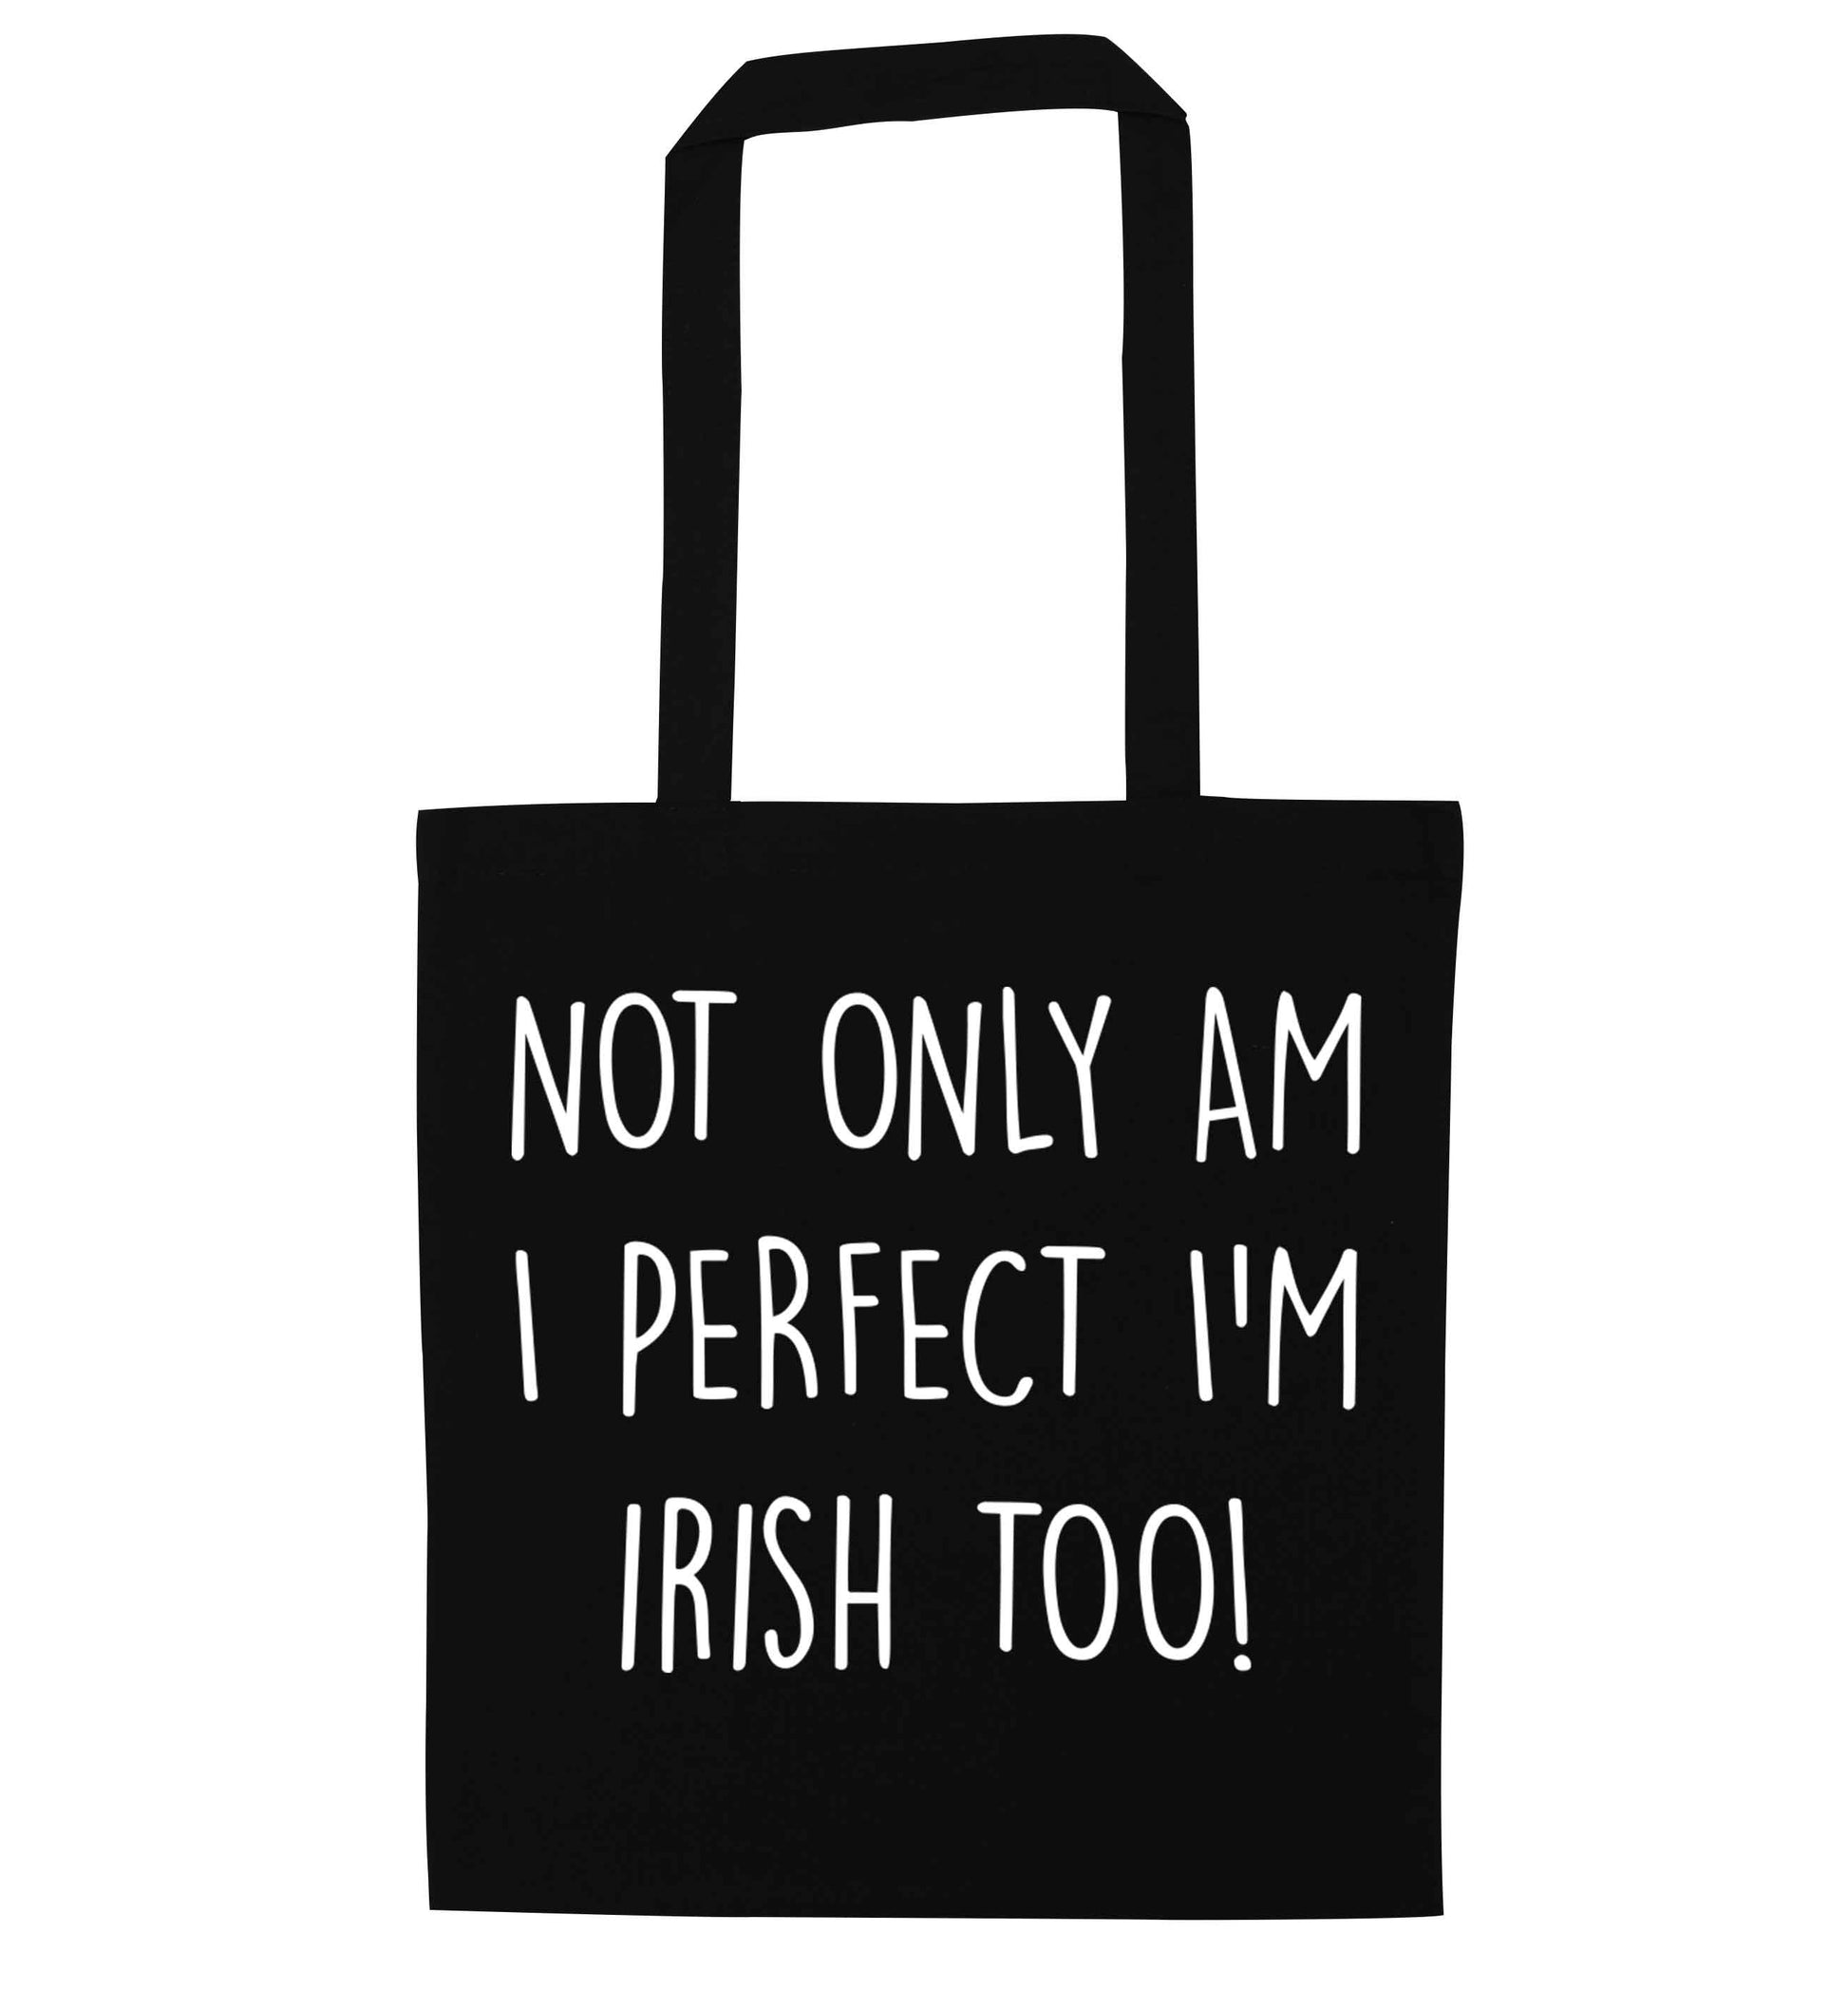 Not only am I perfect I'm Irish too! black tote bag